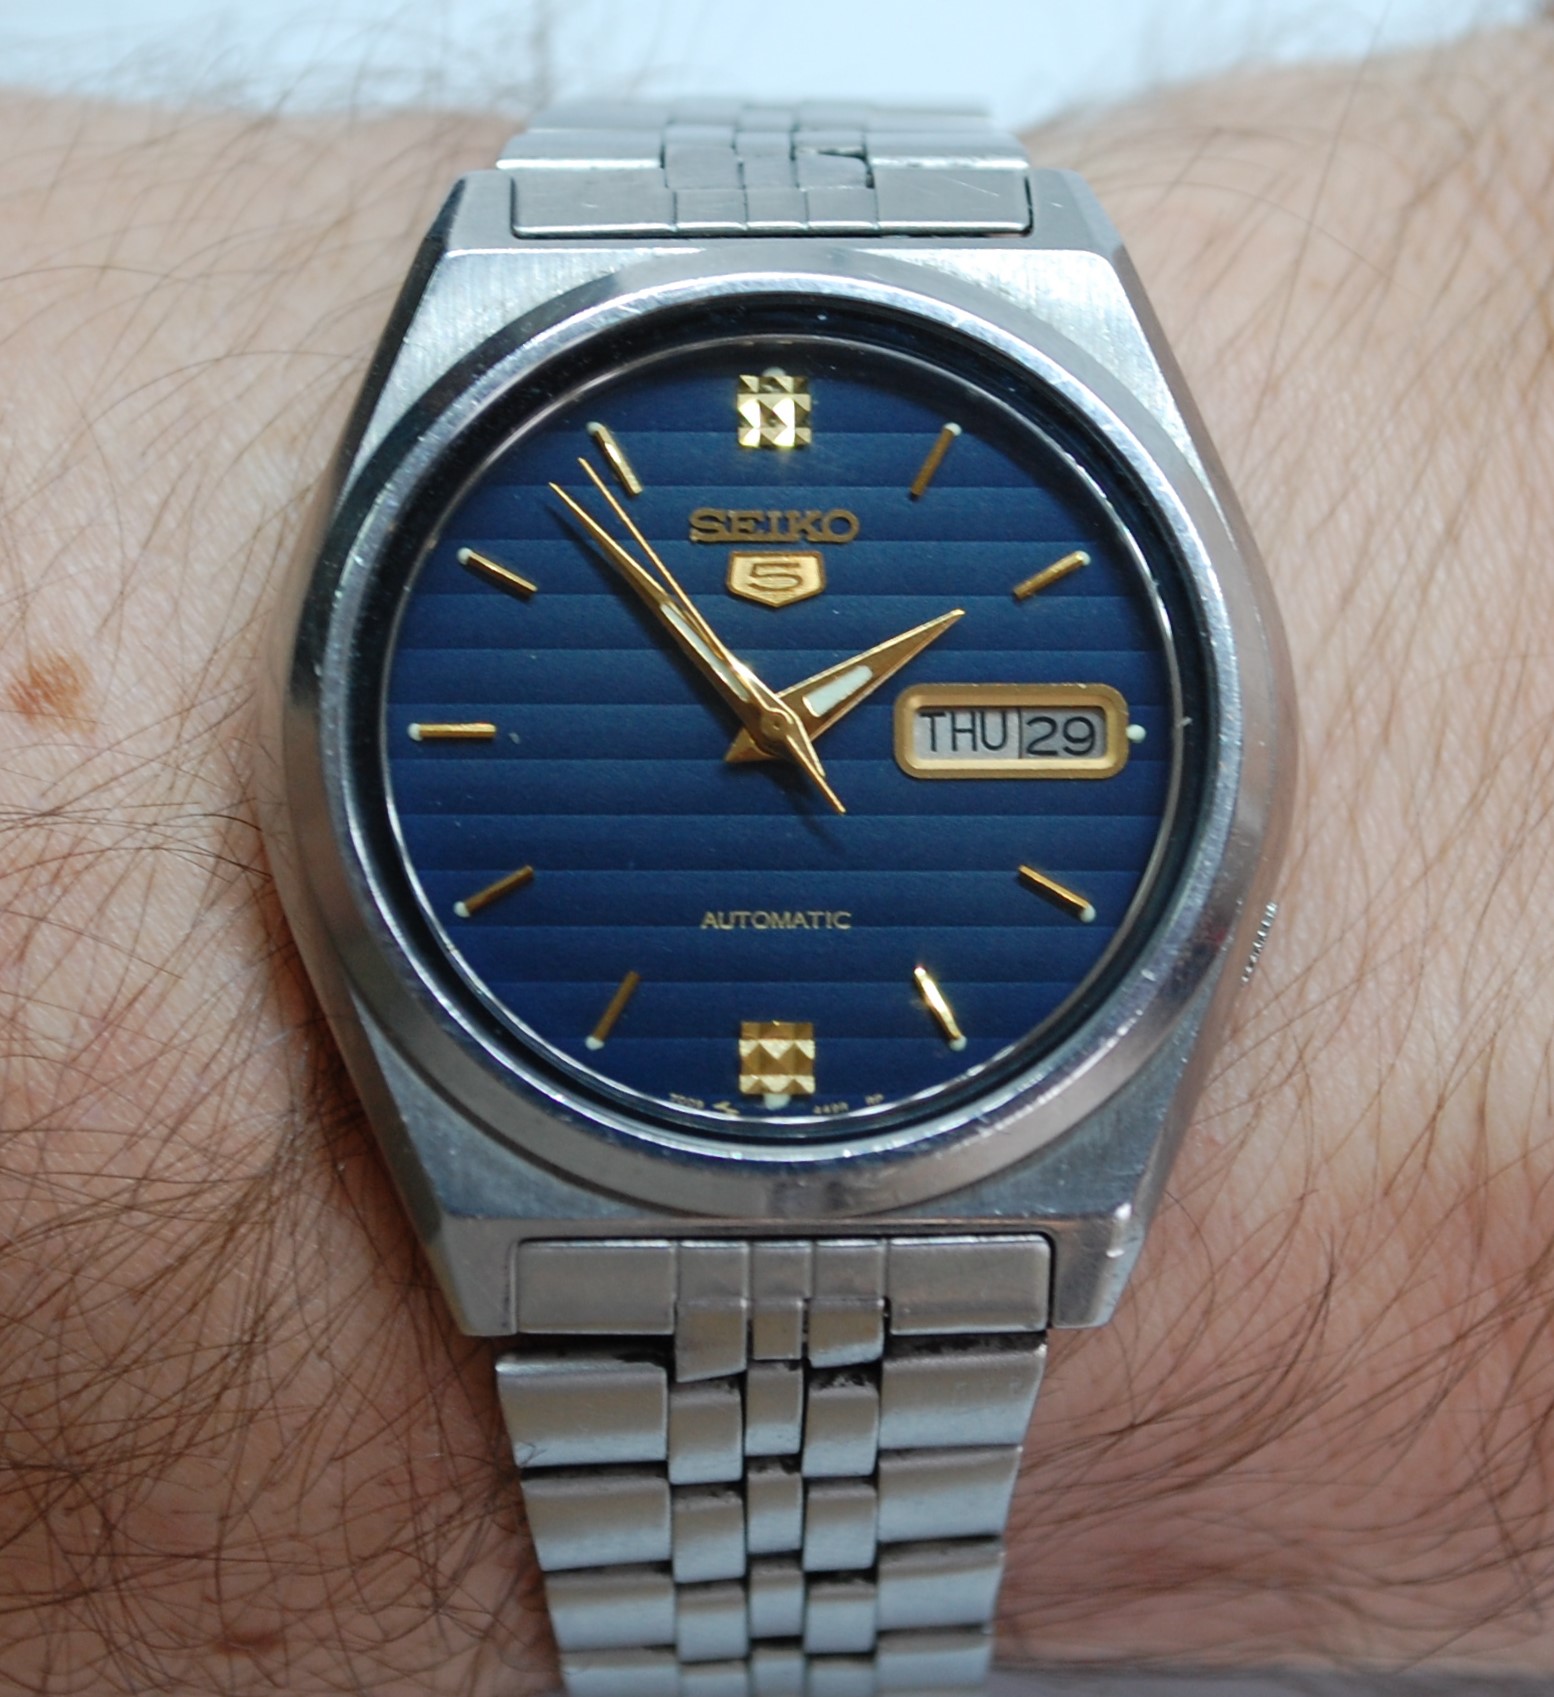 SOLD 1981 Seiko 5 automatic 7009-876A - Birth Year Watches